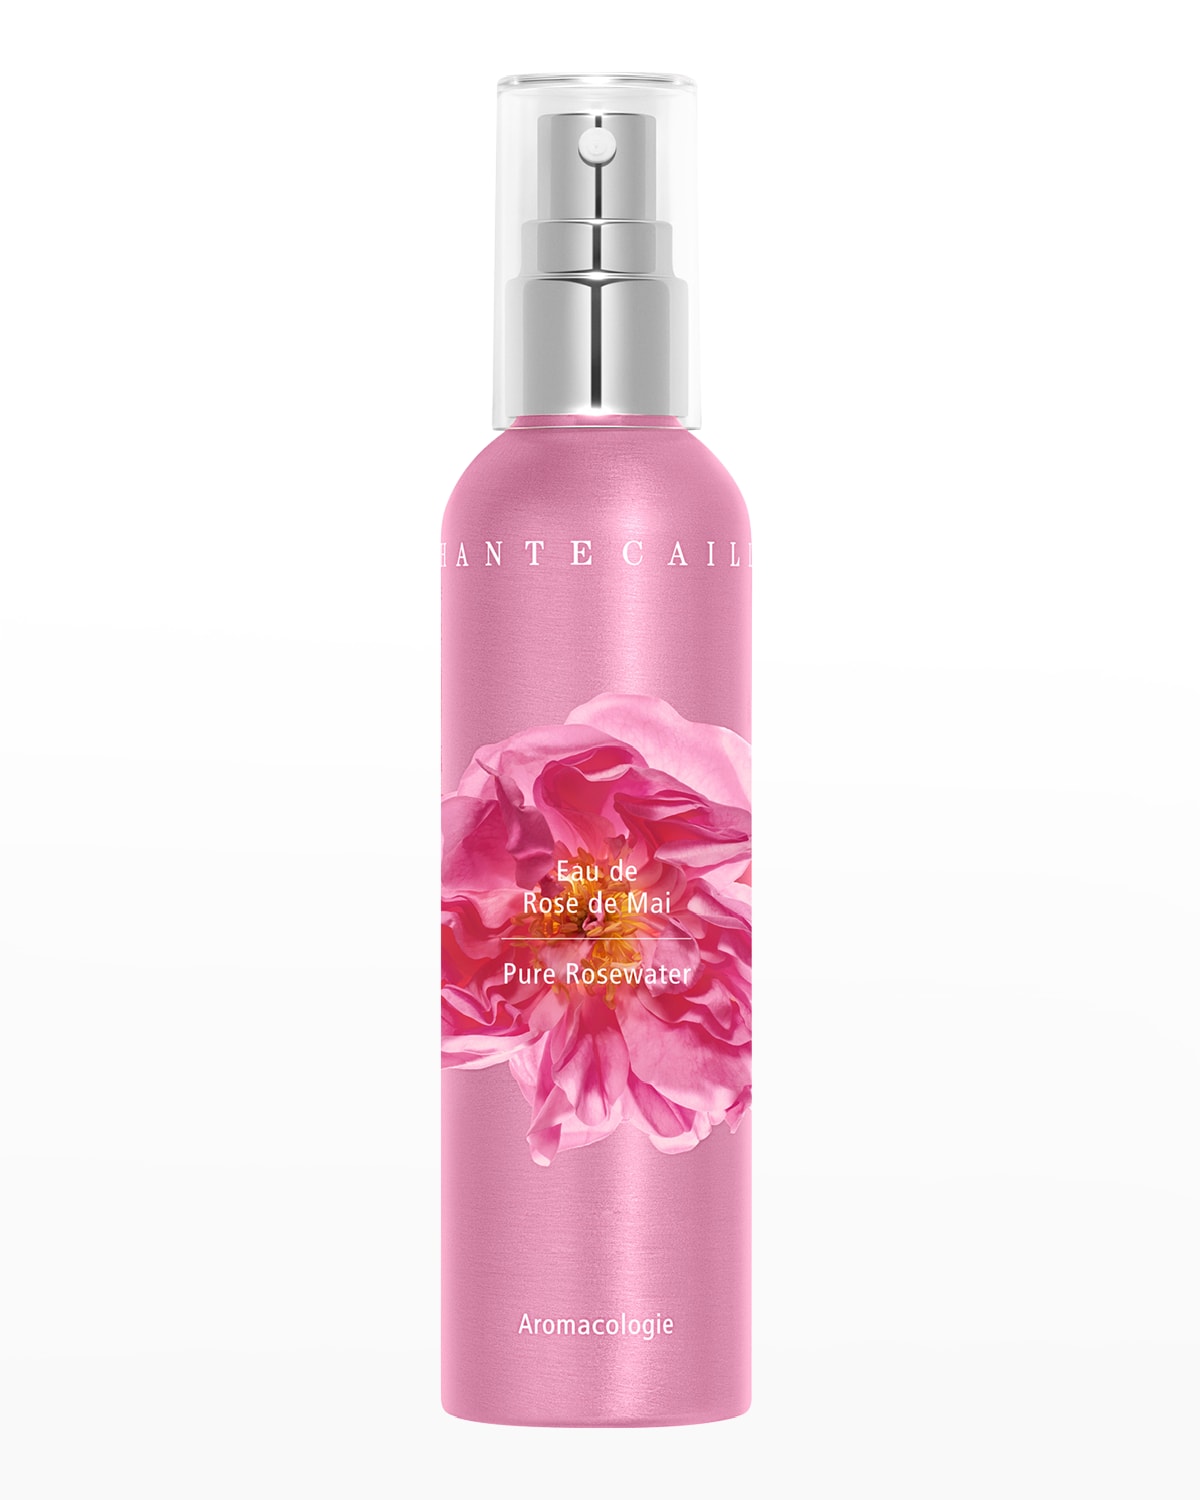 Pure Rosewater - Limited Edition, 4.2 oz. | Neiman Marcus